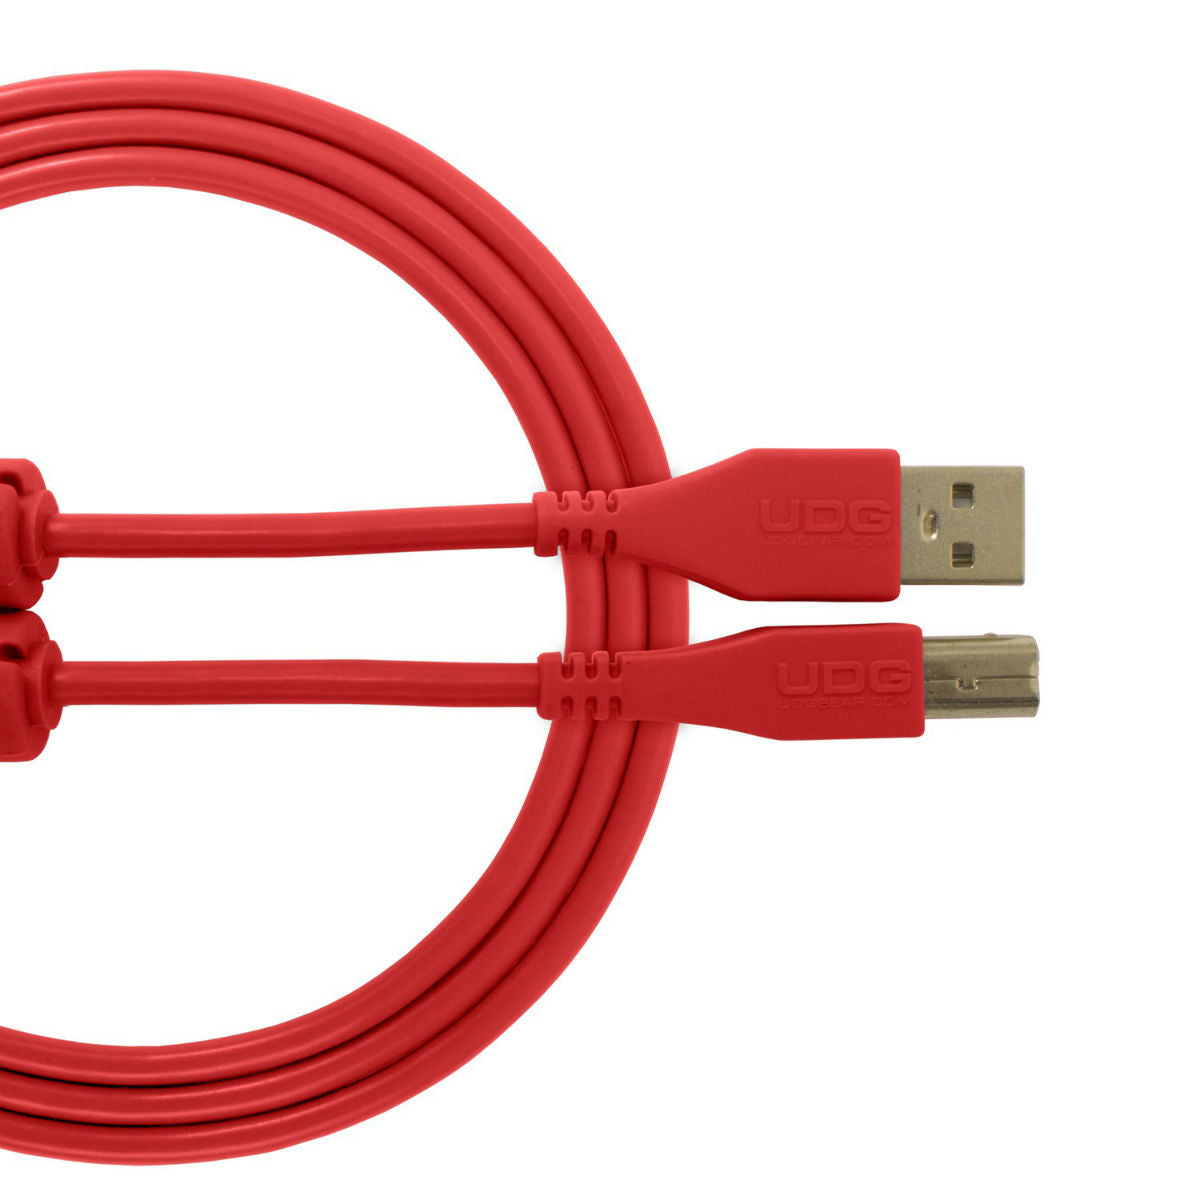 UDG USB Cable A-B 3m Red U95003RD